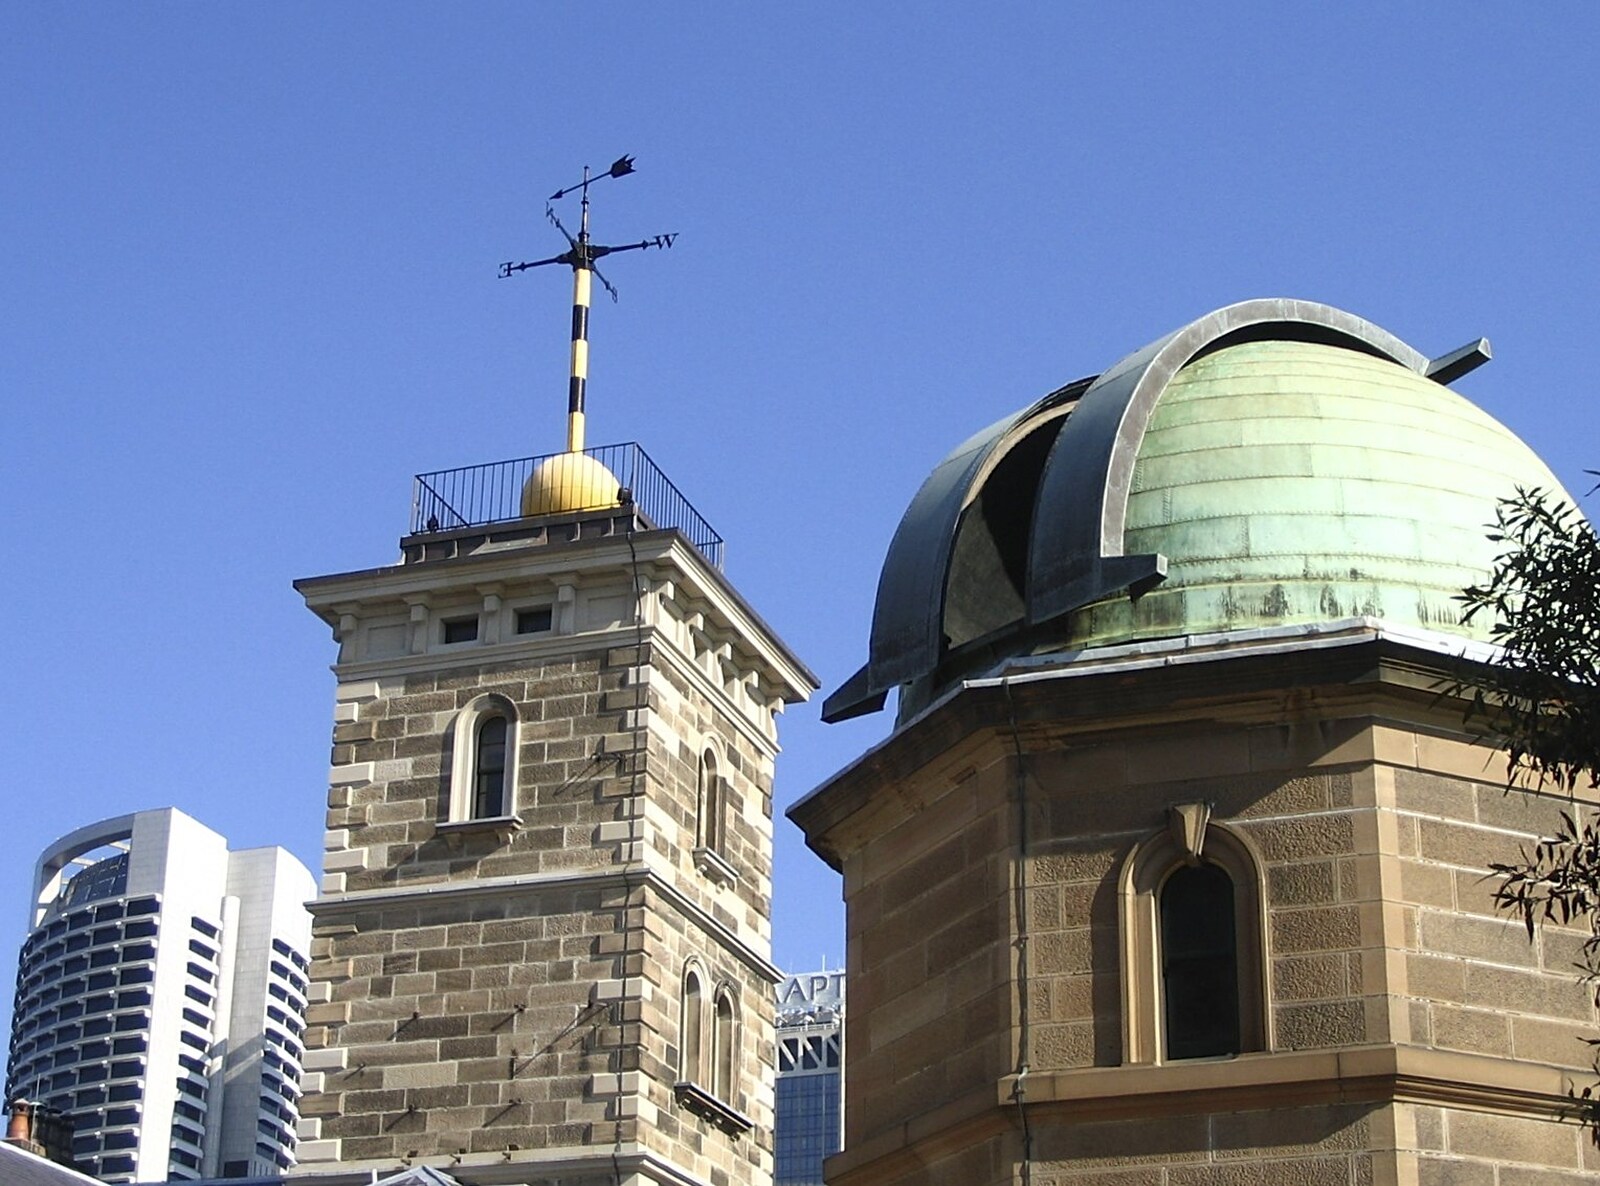 The observatory from Sydney, New South Wales, Australia - 10th October 2004